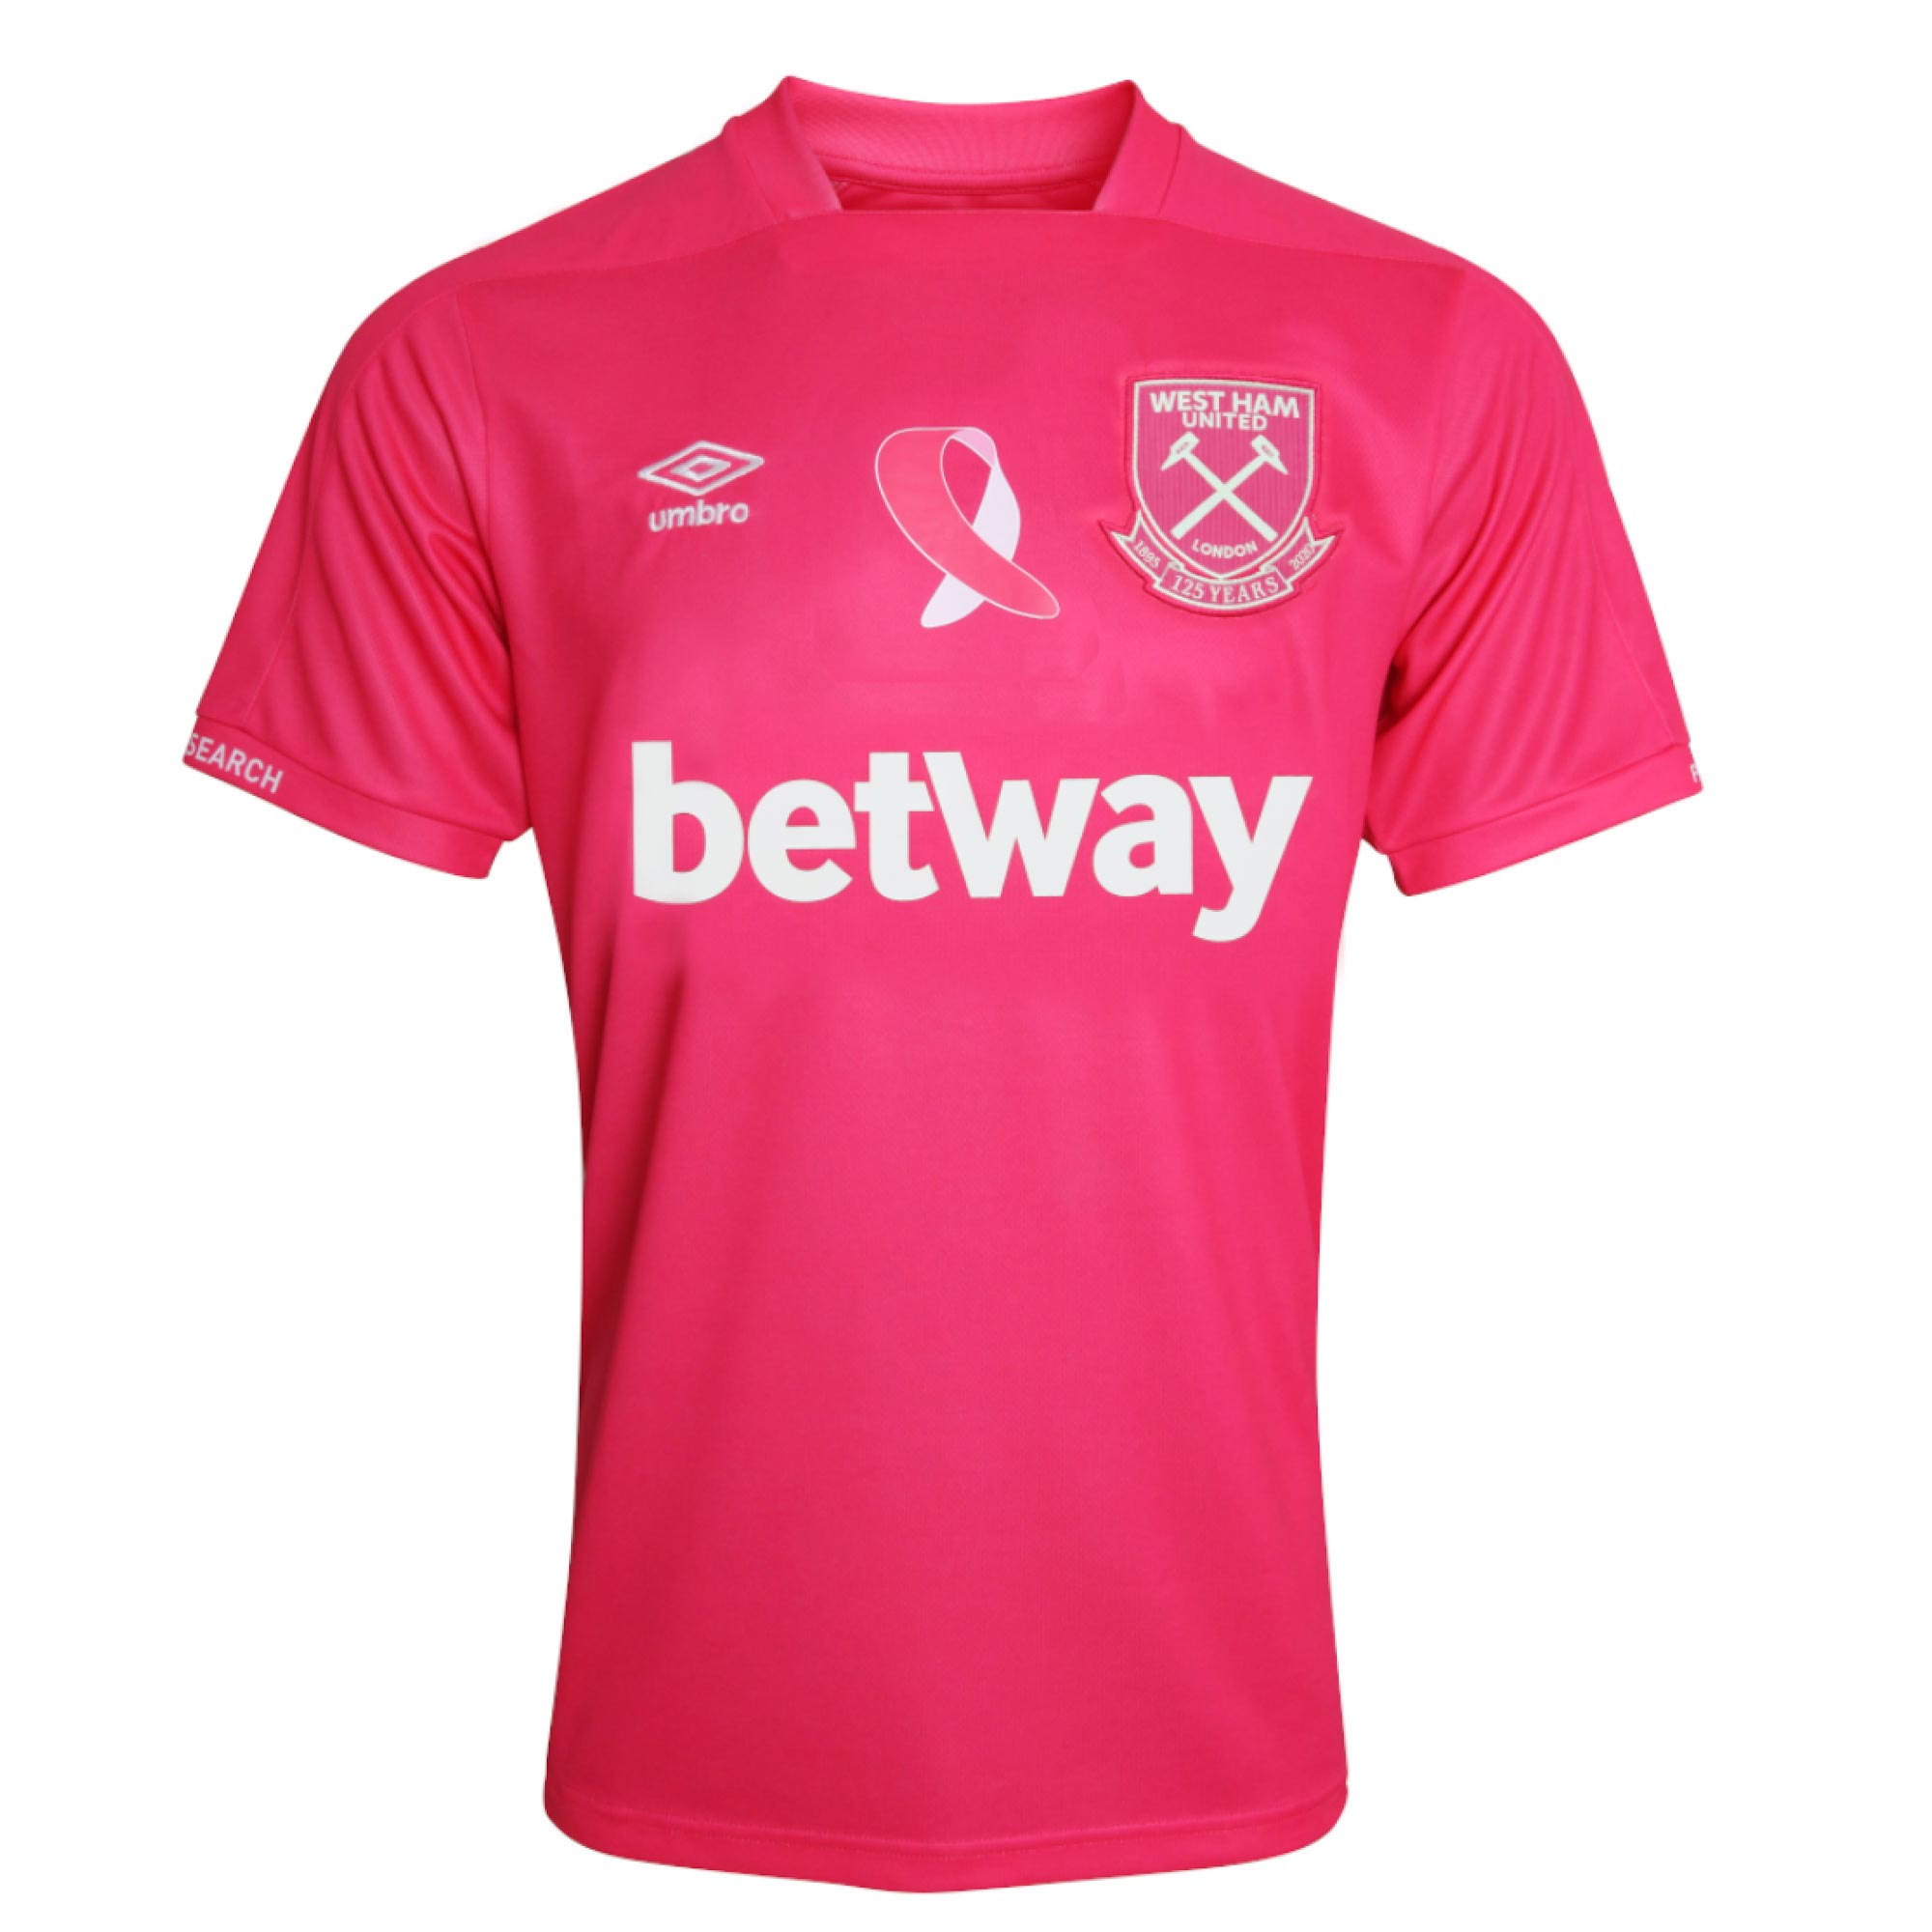 Whu X Breast Cancer Now 20/21 Adult Shirt PINK